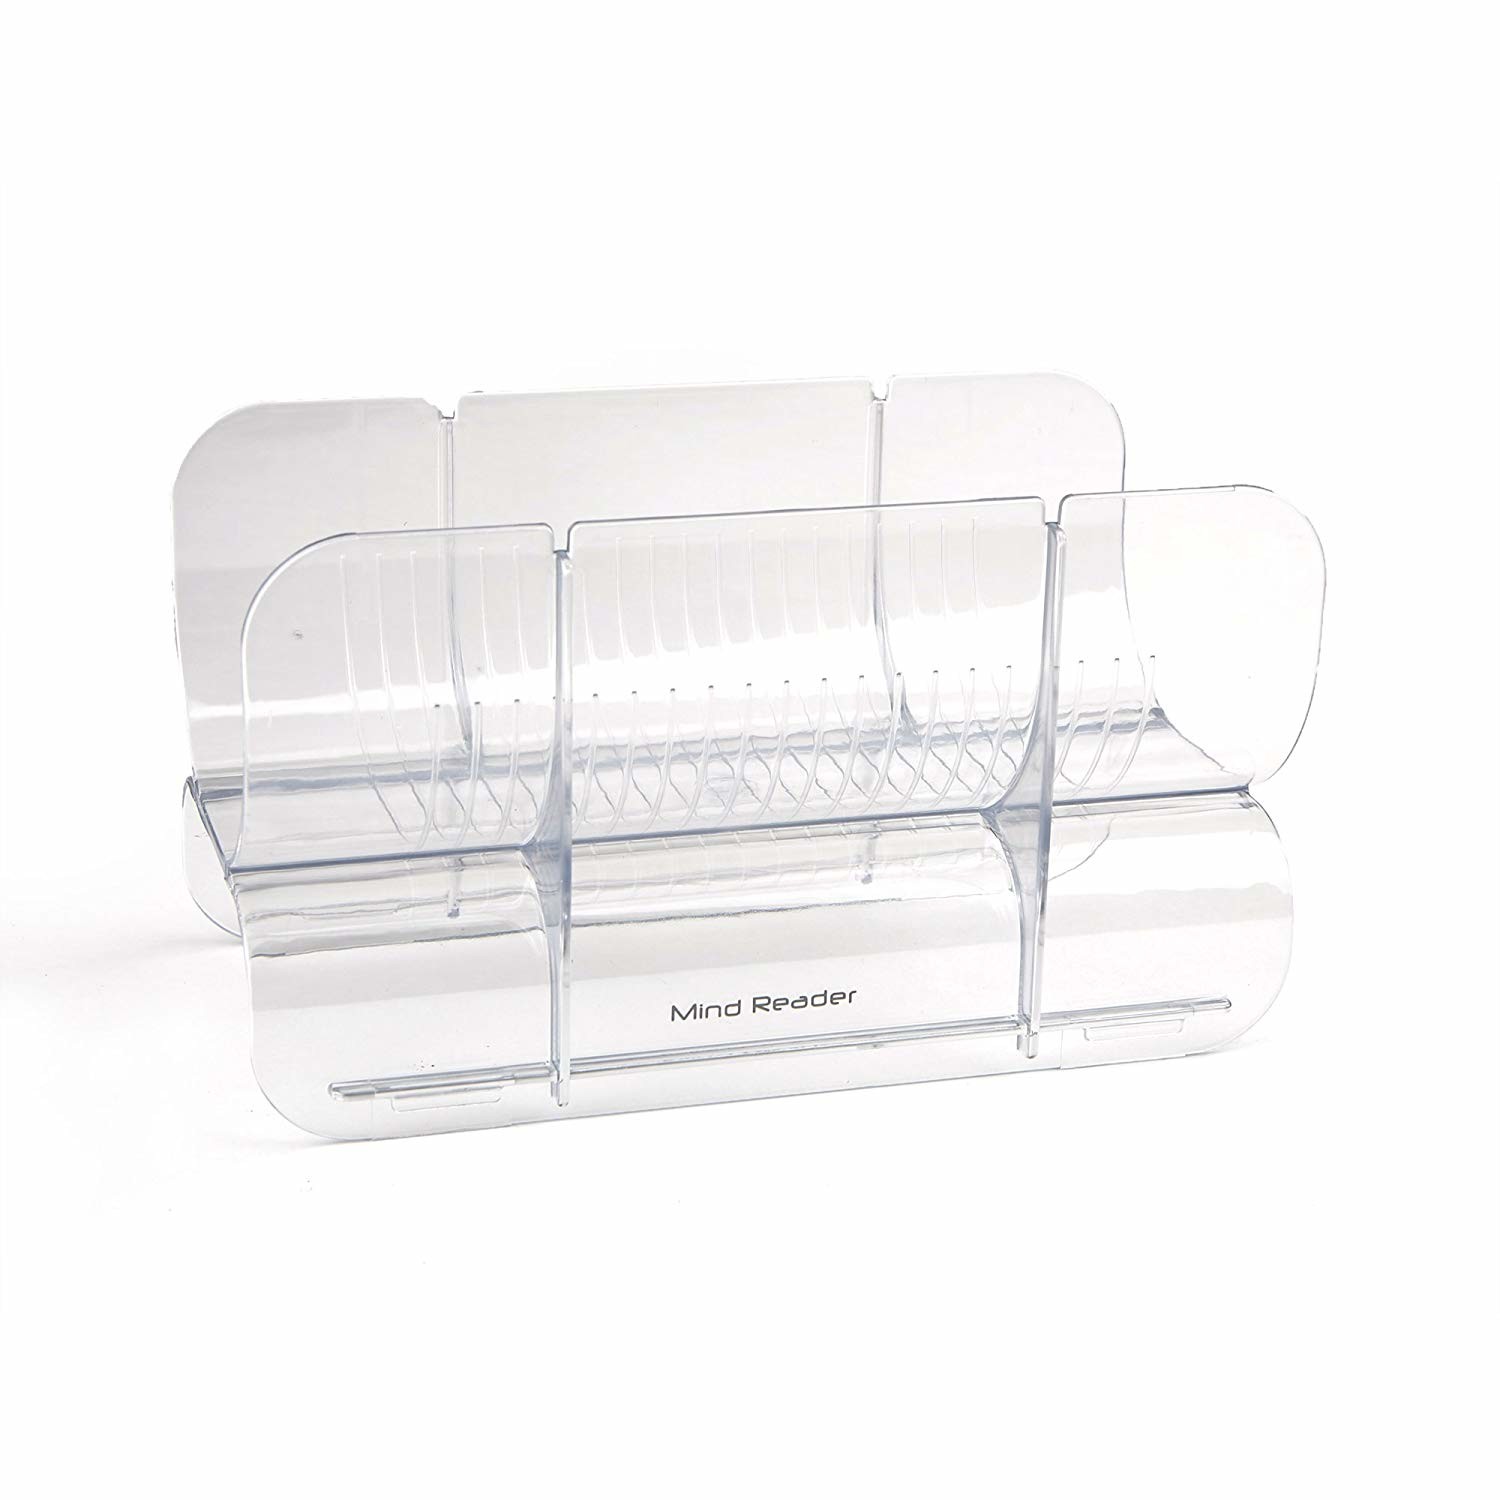 Double Wine Acrylic Bottle Rack Table Top Clear Lucite Display